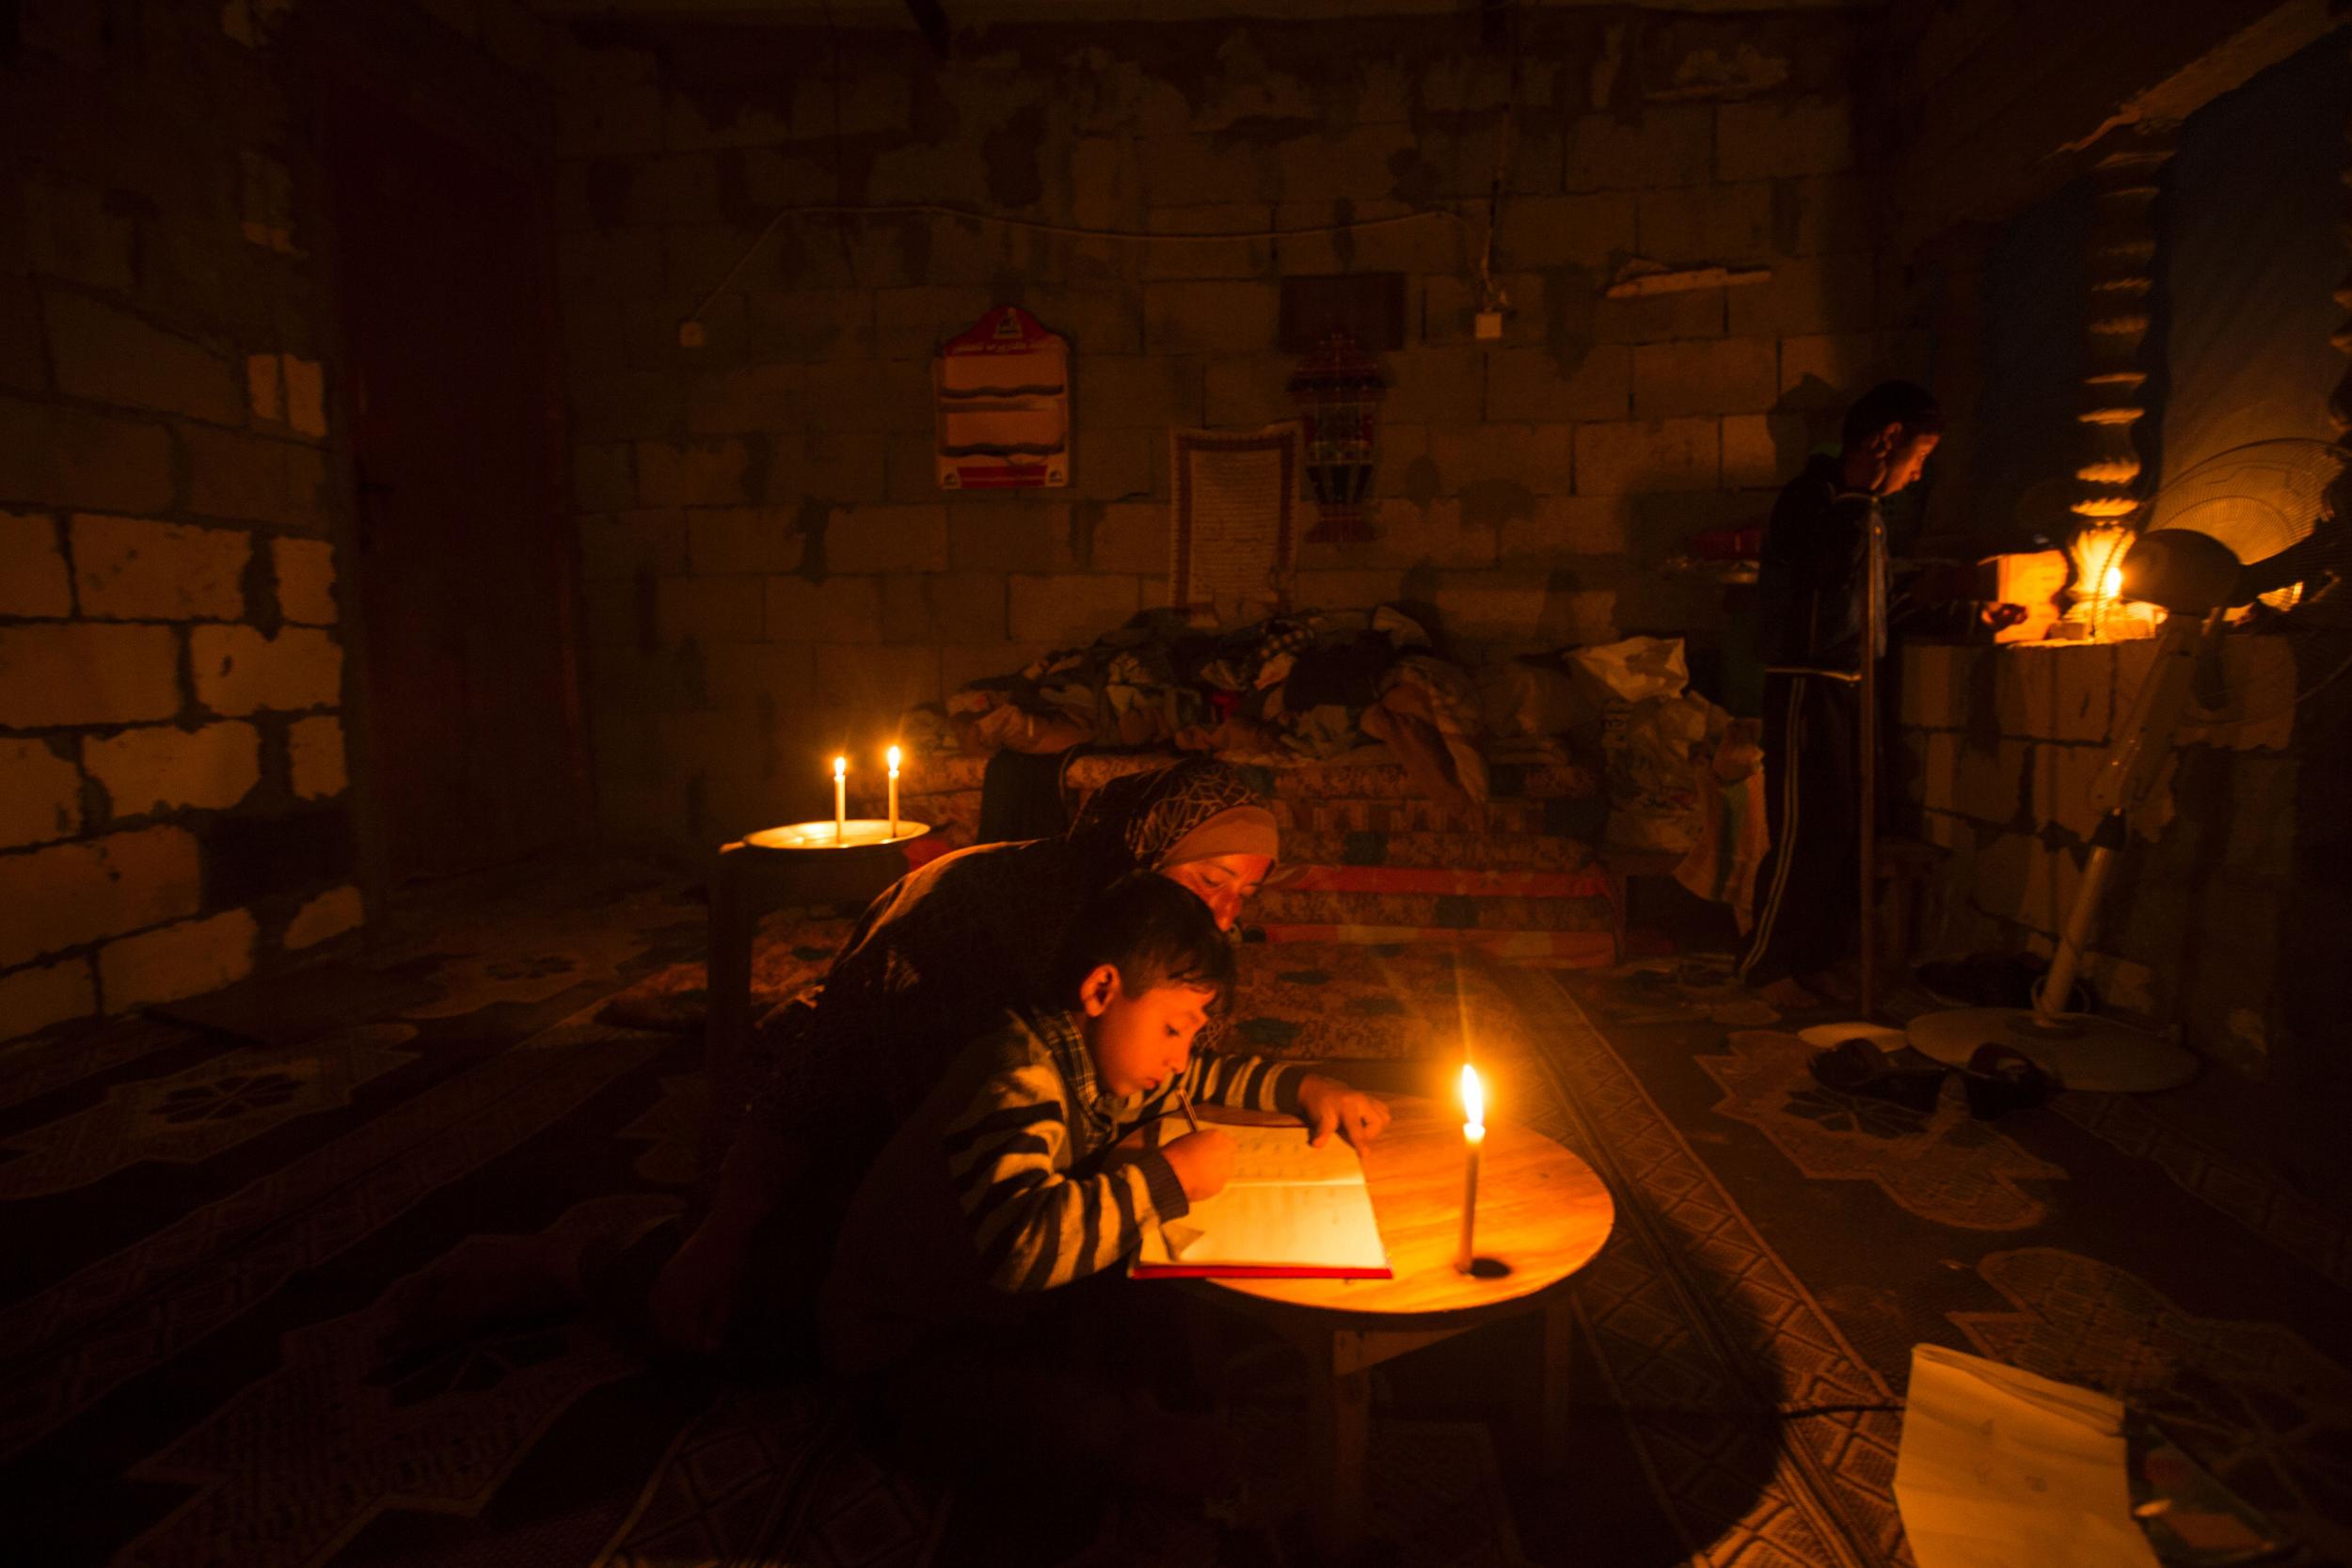 A Palestinian woman helps her son study, by candlelight, at their makeshift home in the Khan Yunis refugee camp in the southern Gaza Strip